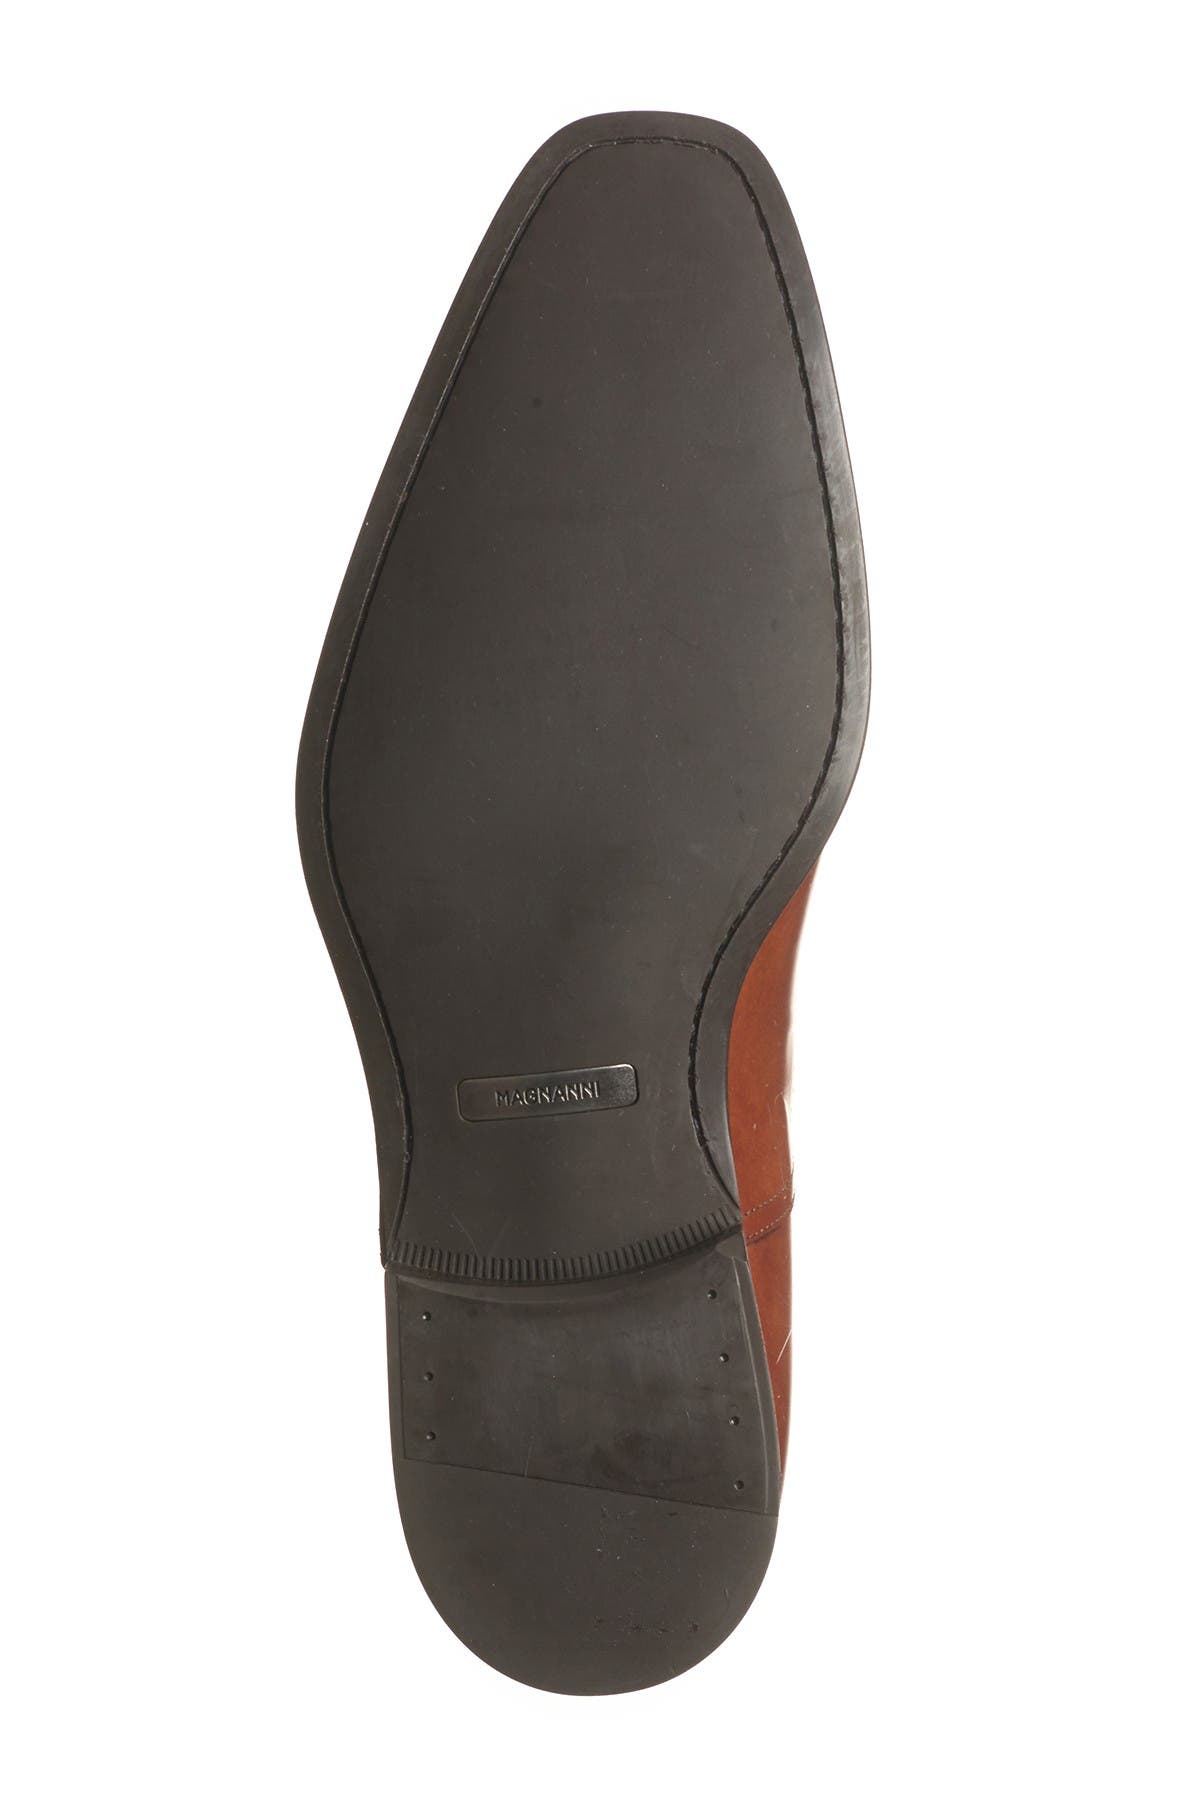 magnanni lucas leather oxford